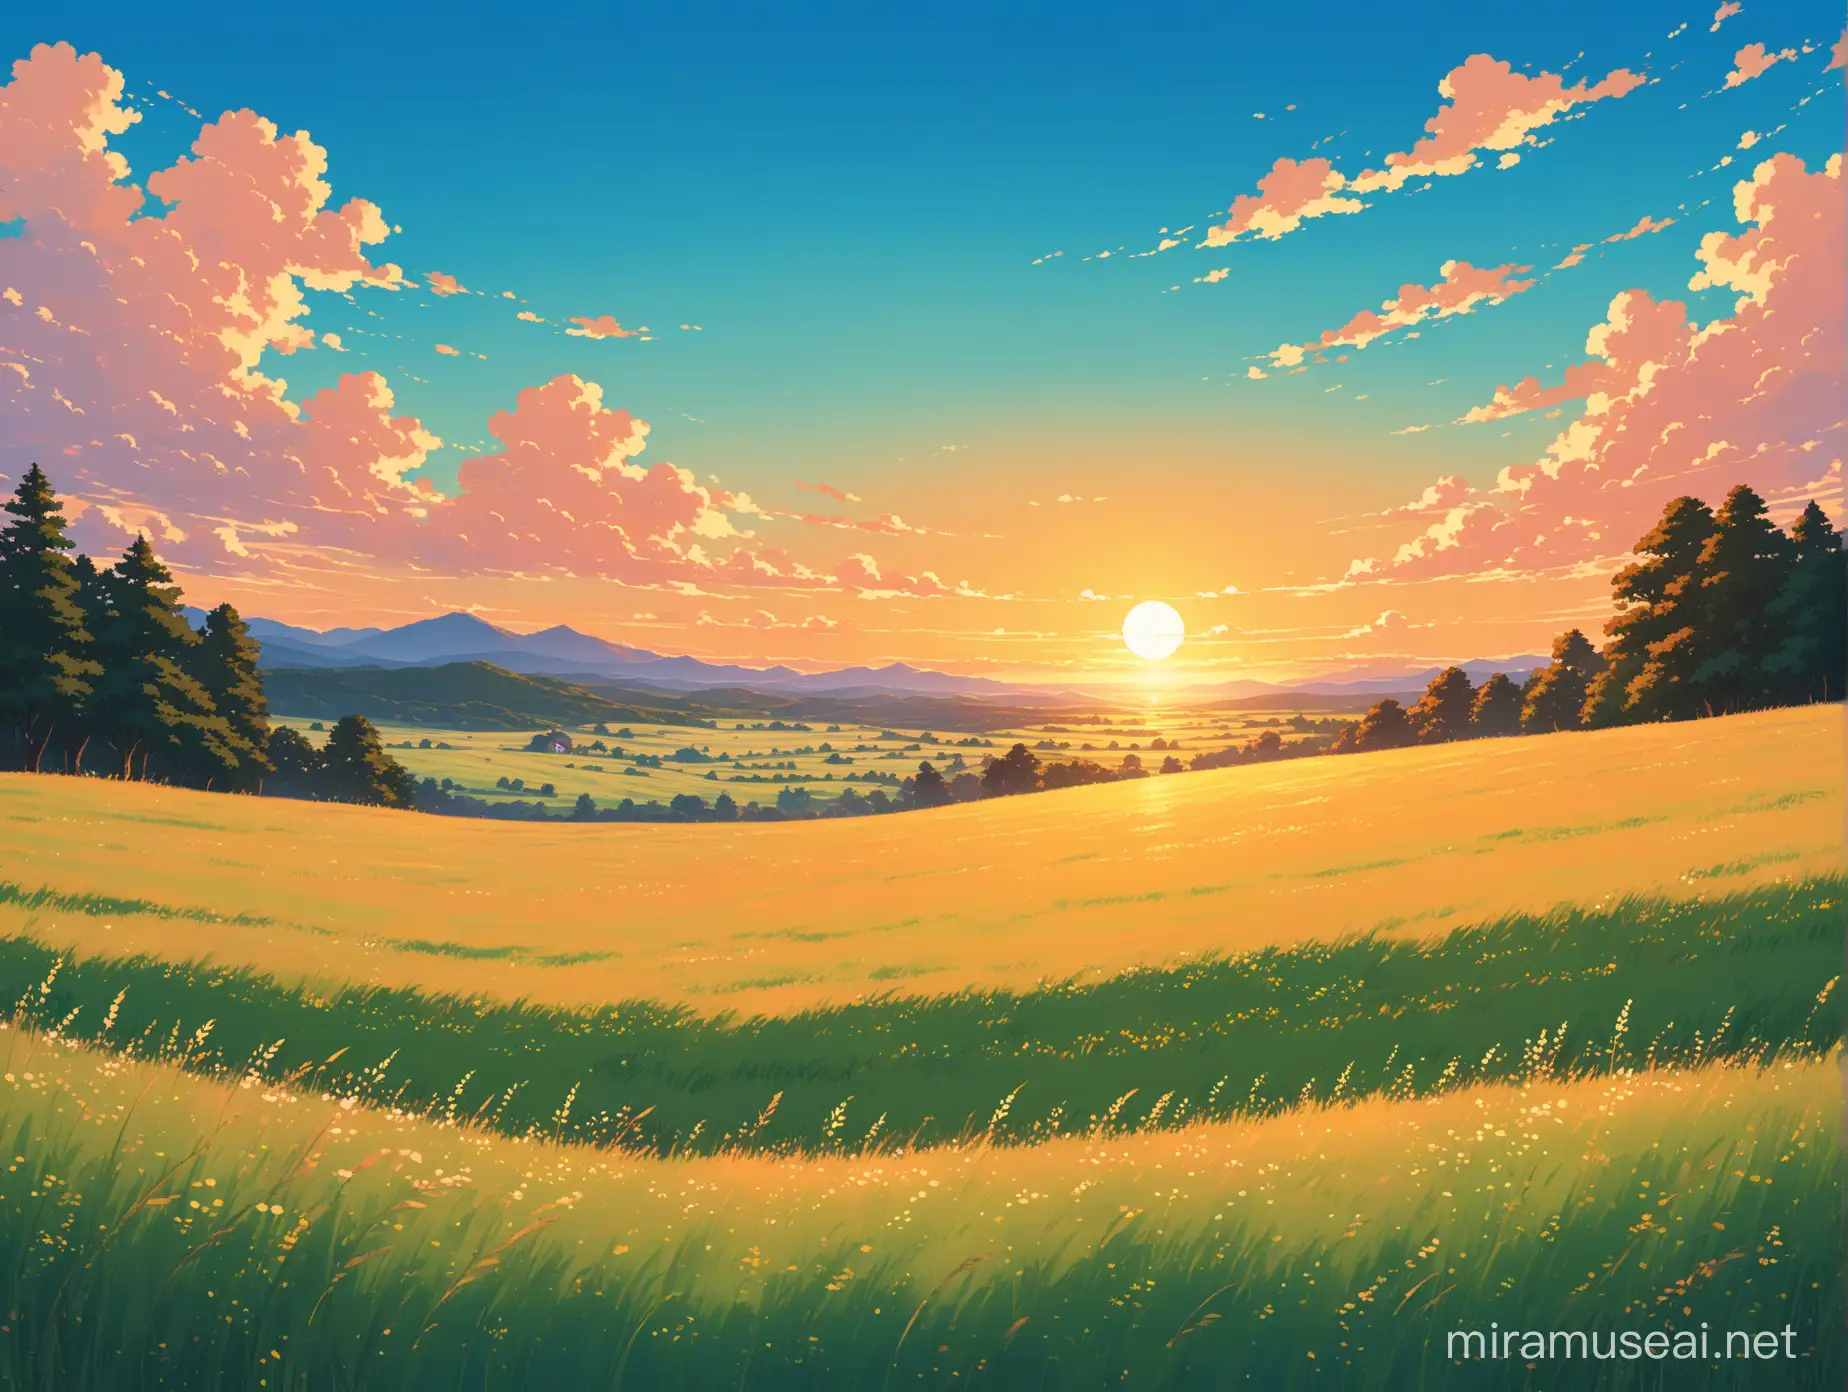 meadow in sunset with clear blue wide sky, beautiful ambiance, ghibli style